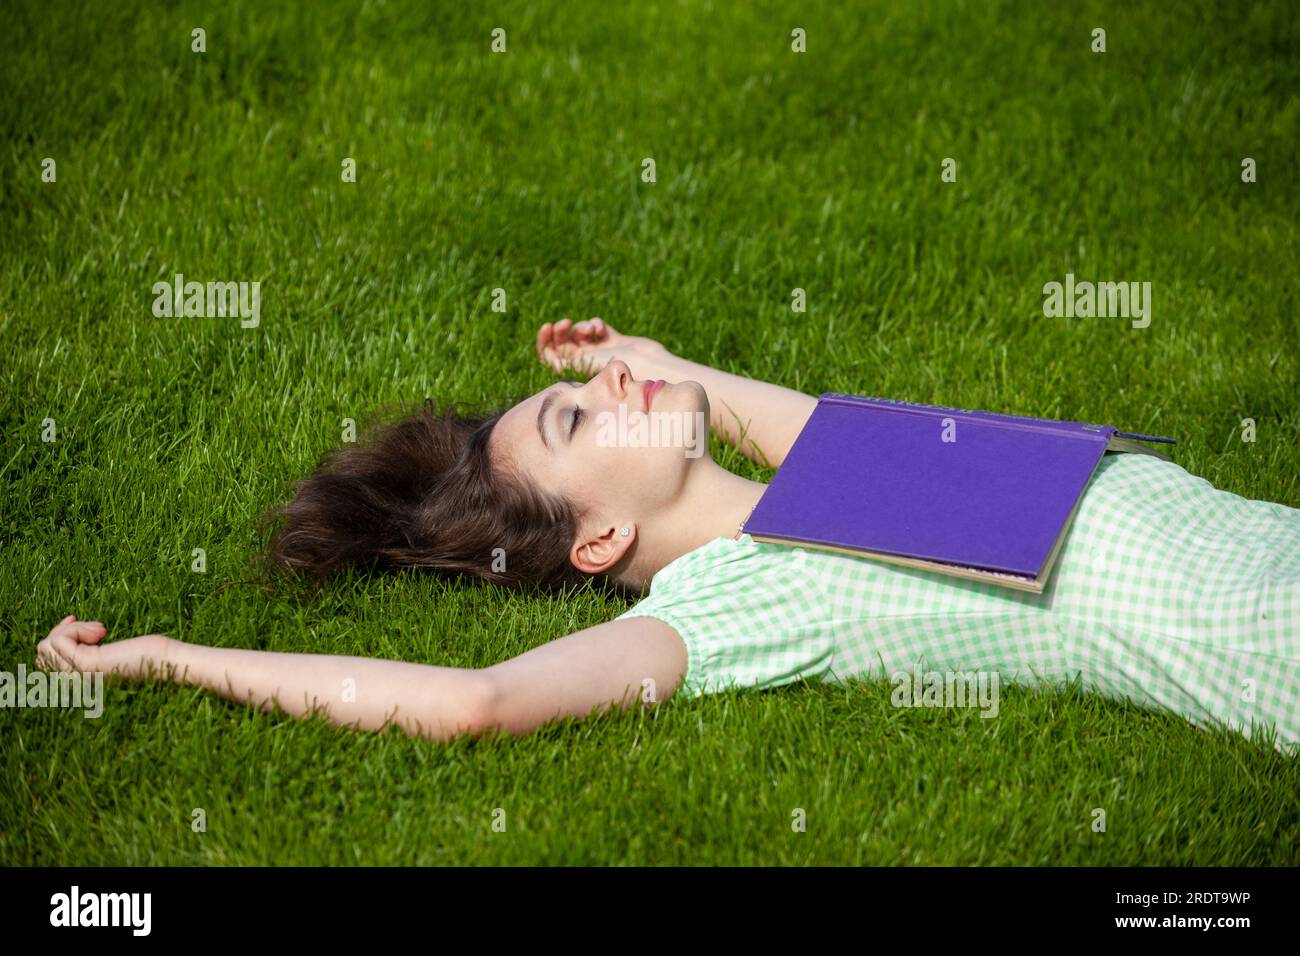 A young woman lying on her back with her arms outstretched. She is wearing a summer dress and has a book on her chest. Stock Photo